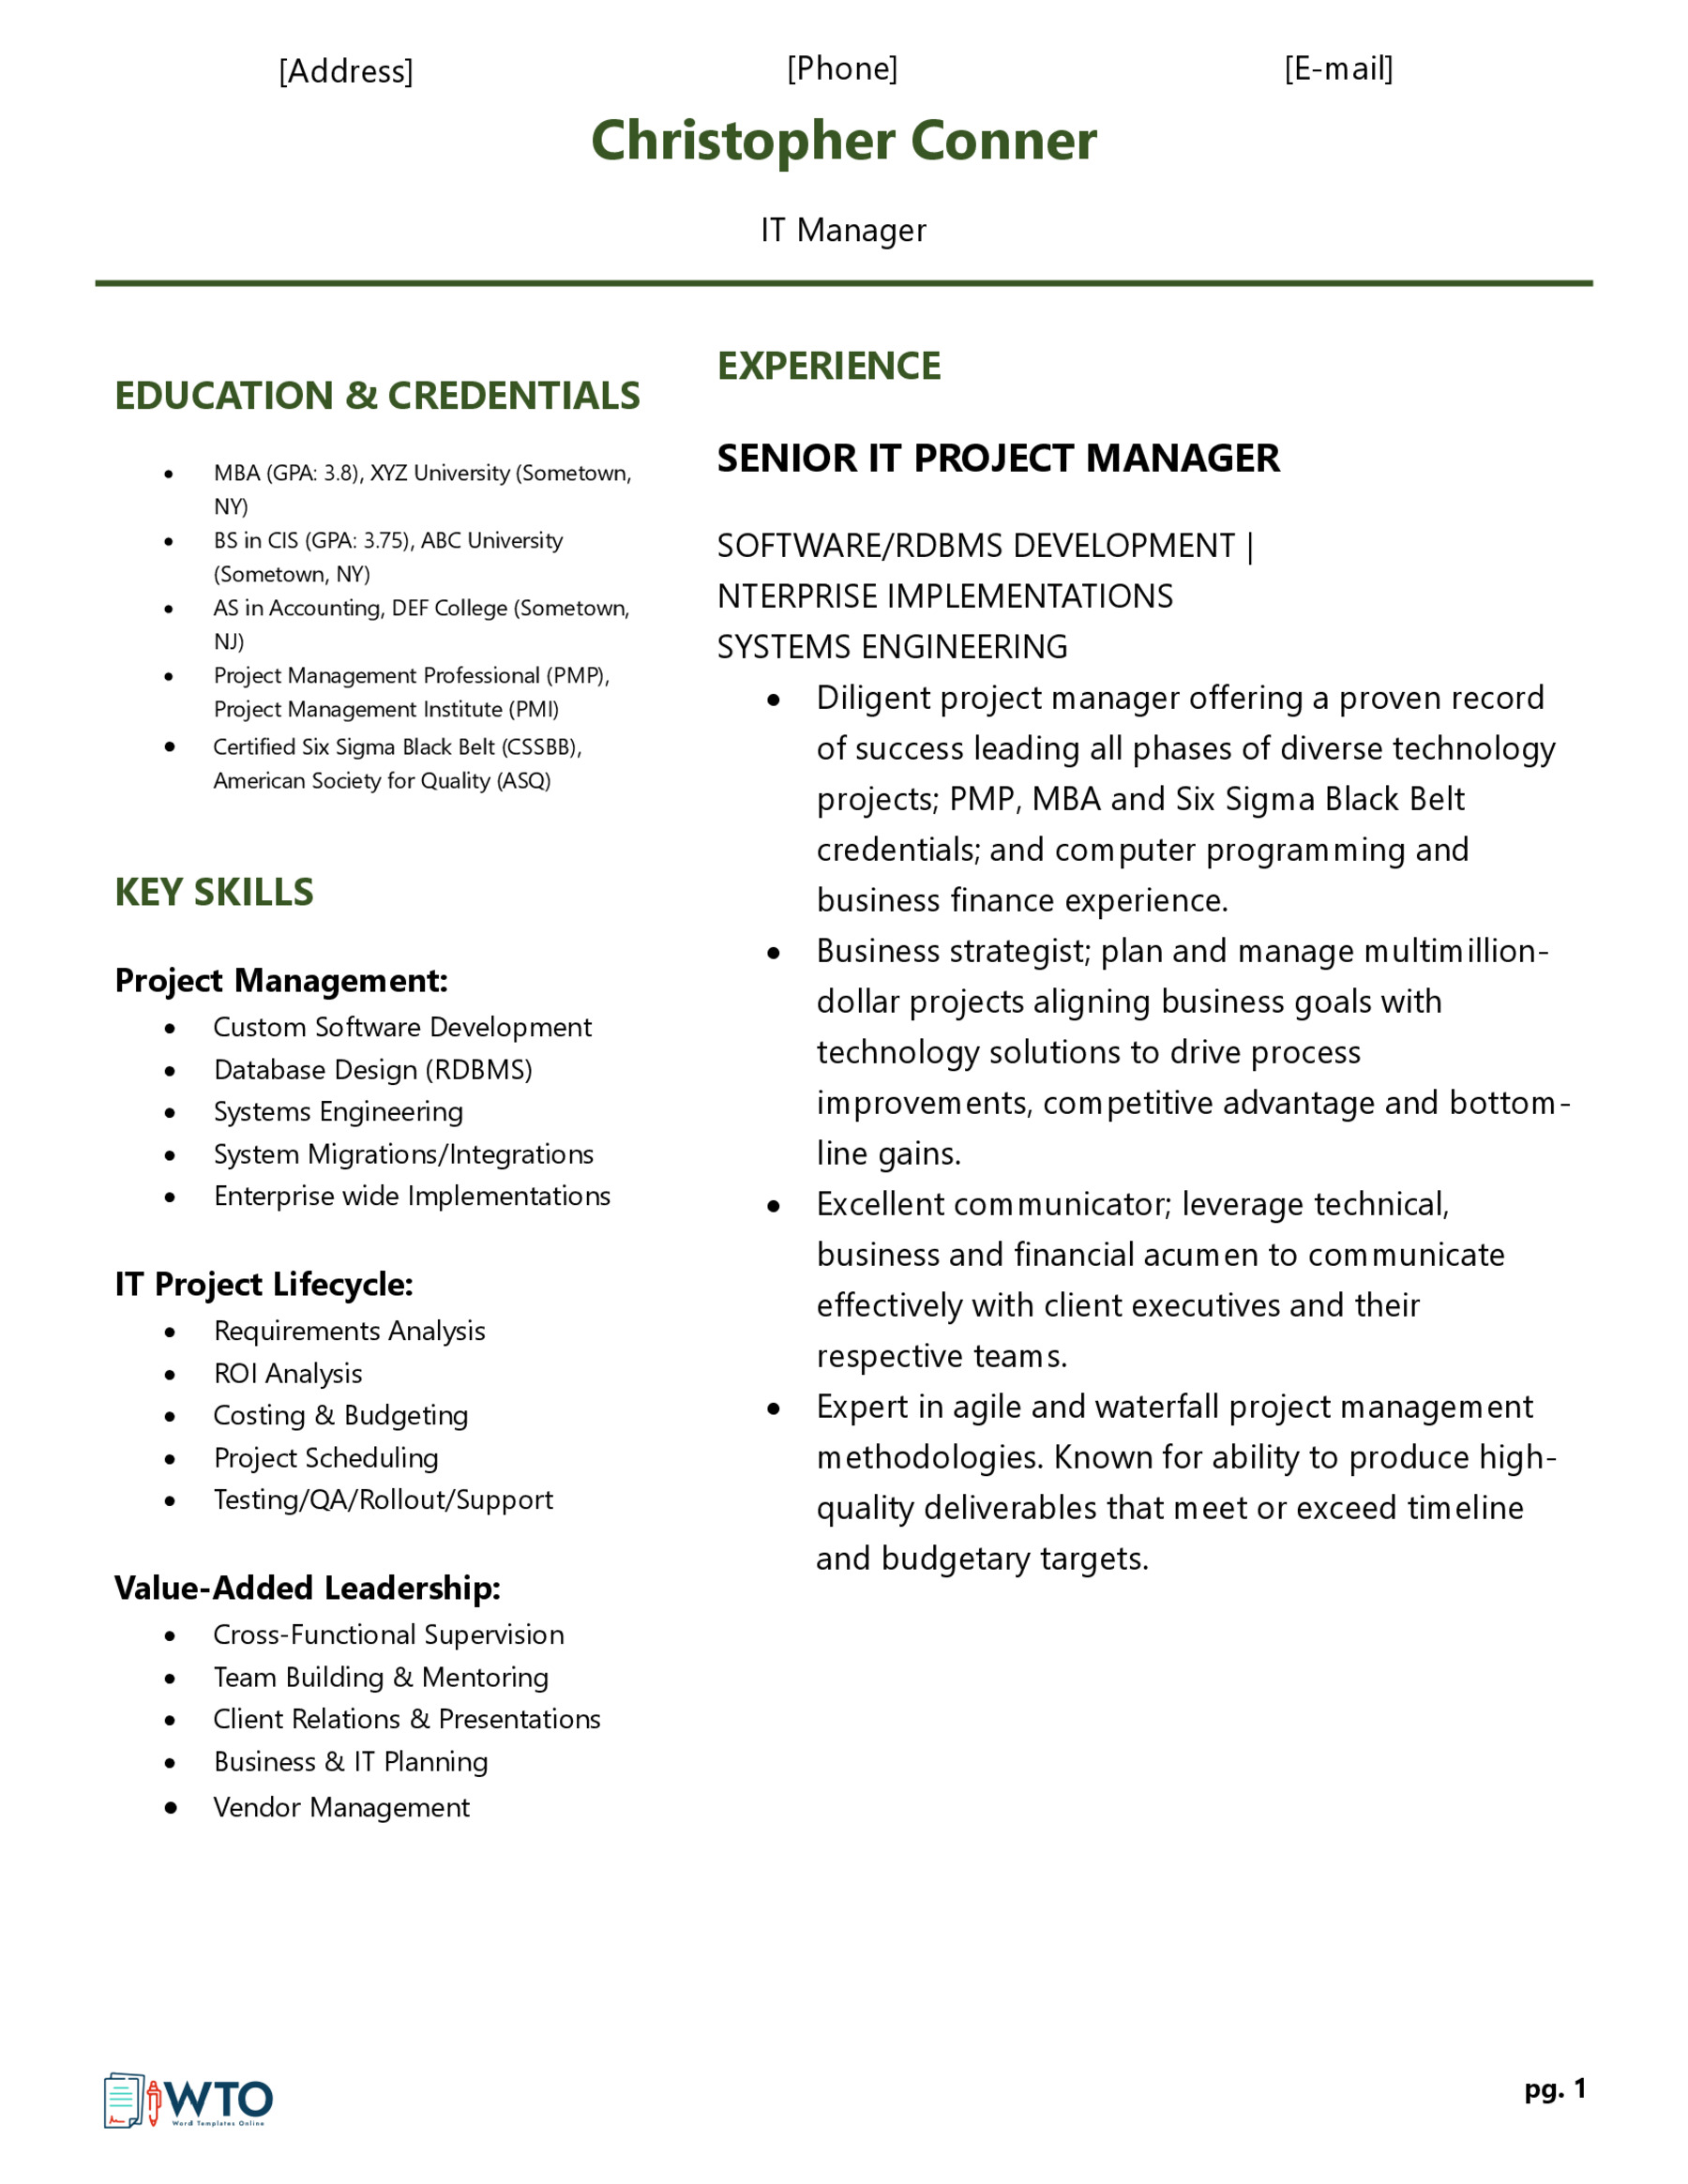 IT Manager Resume Example - Sample Document